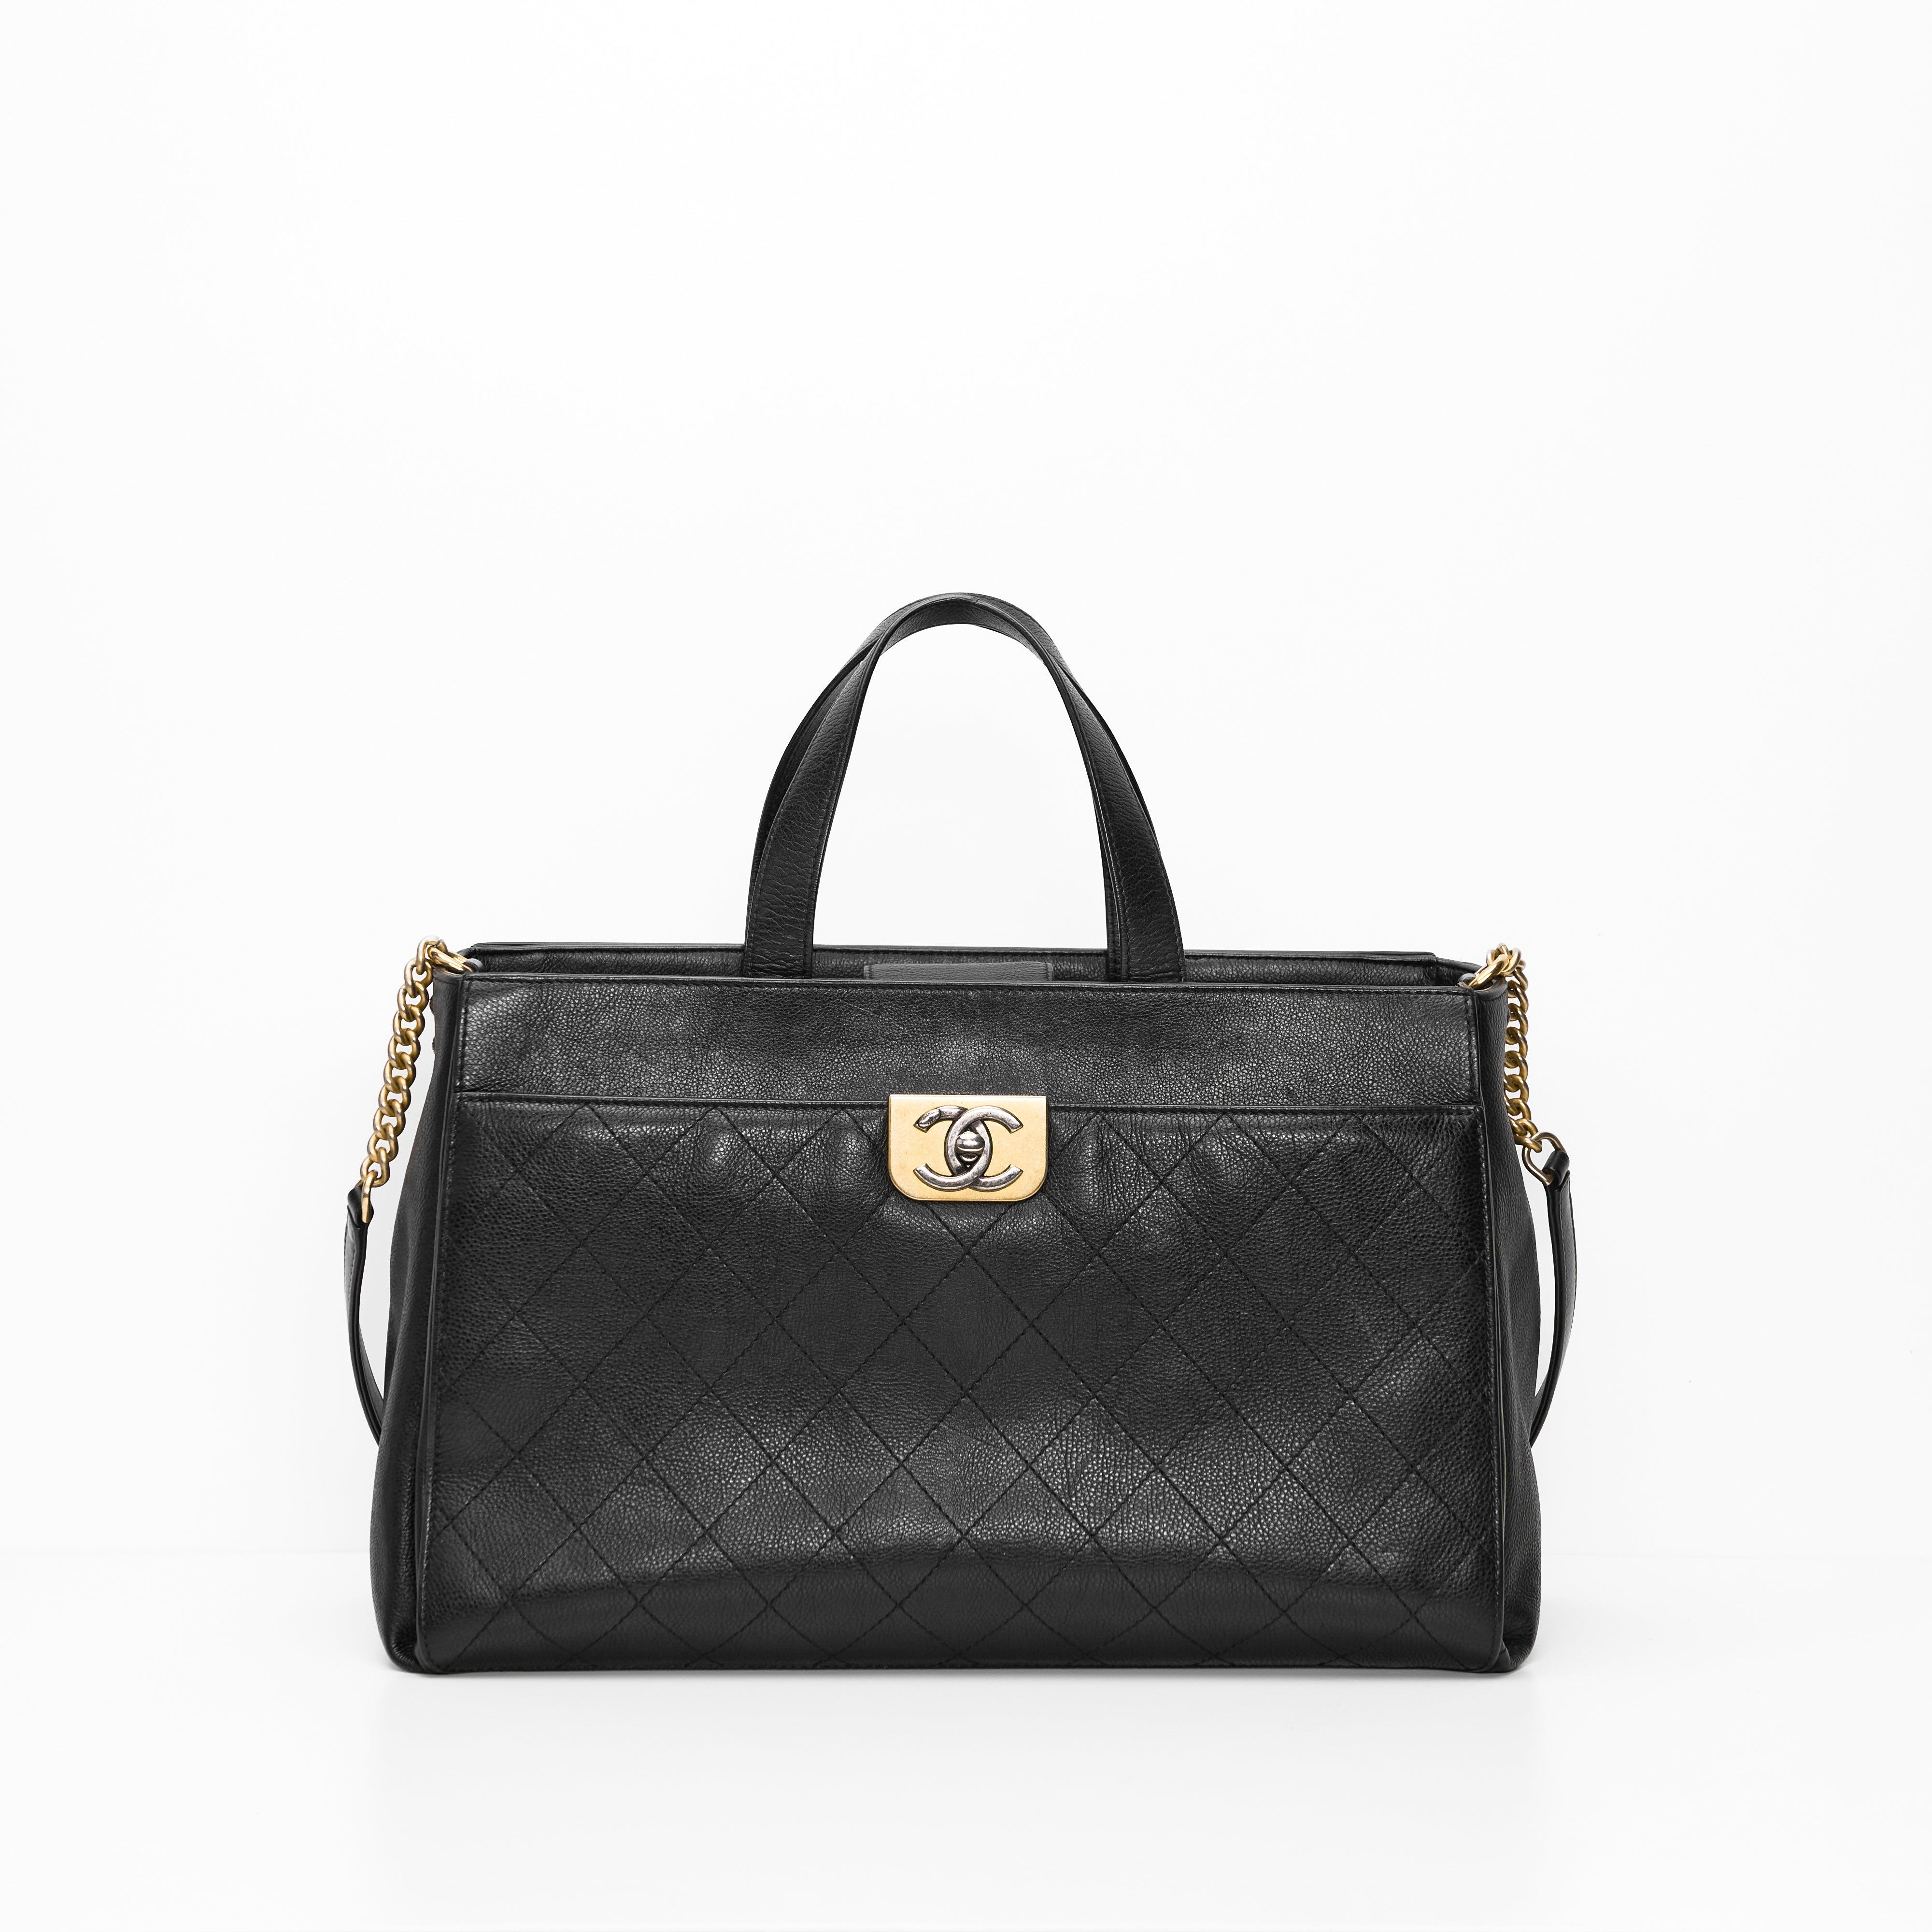 Chanel Black Quilted Caviar Leather Straight Line Tote Bag